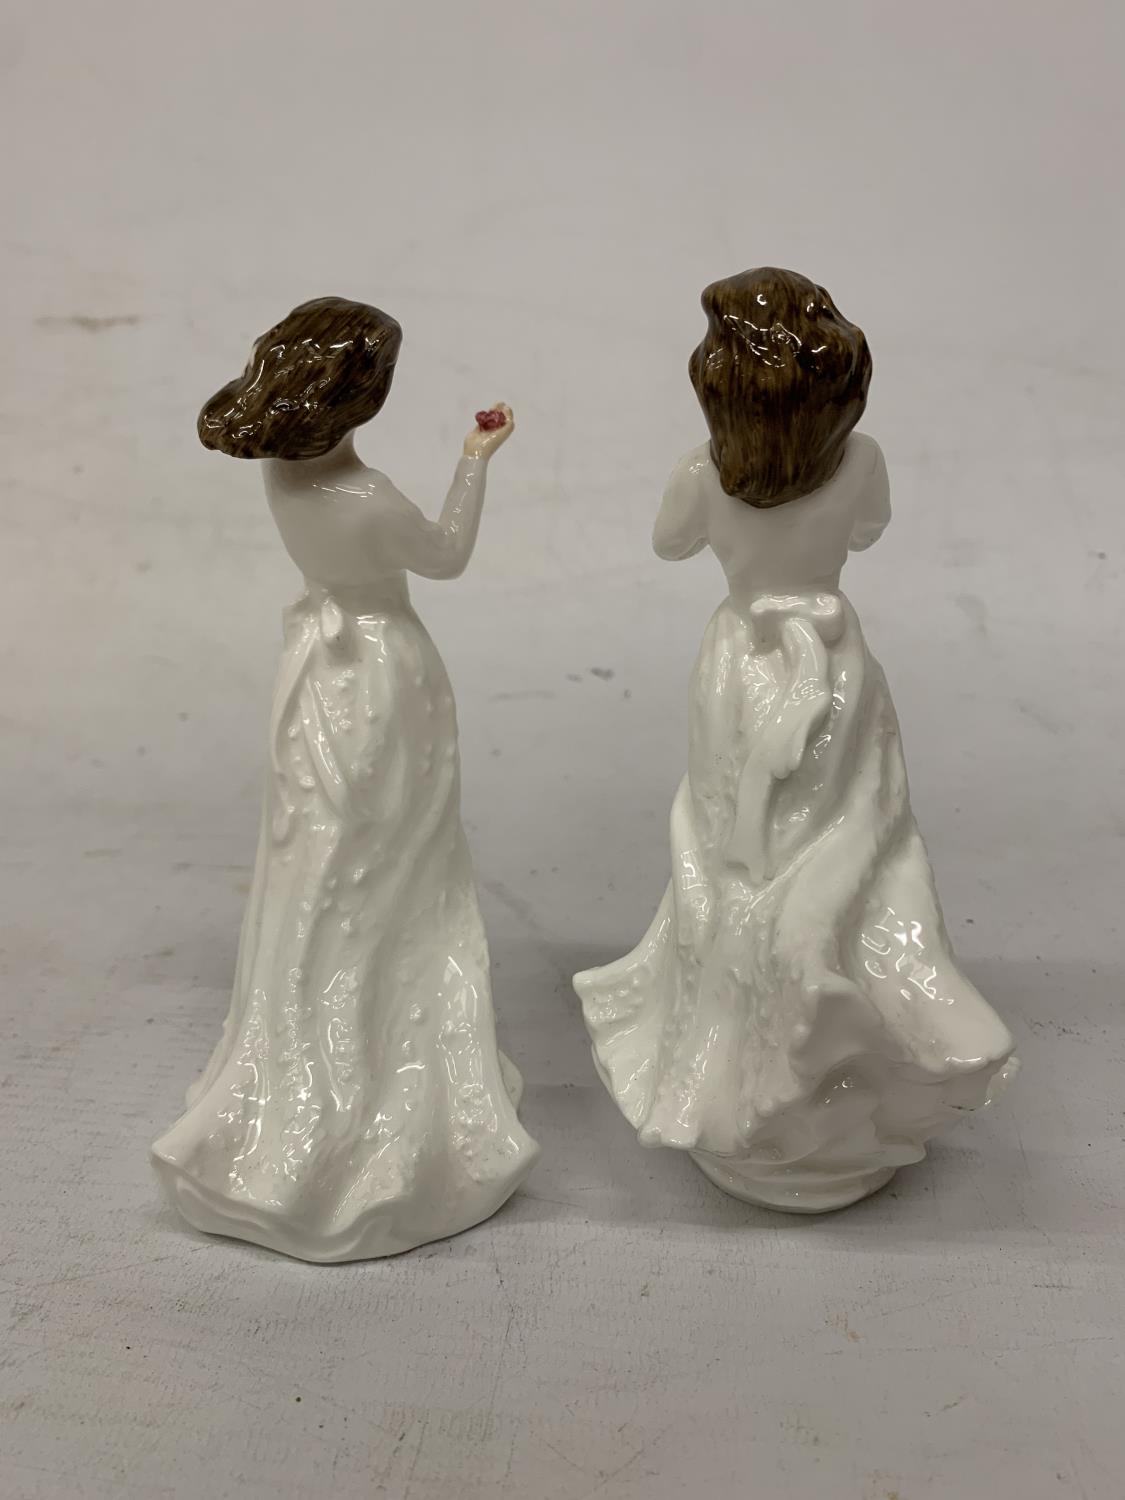 TWO ROYAL DOULTON FIGURES "WITH LOVE" AND "FORGET-ME-NOT" - Image 3 of 4